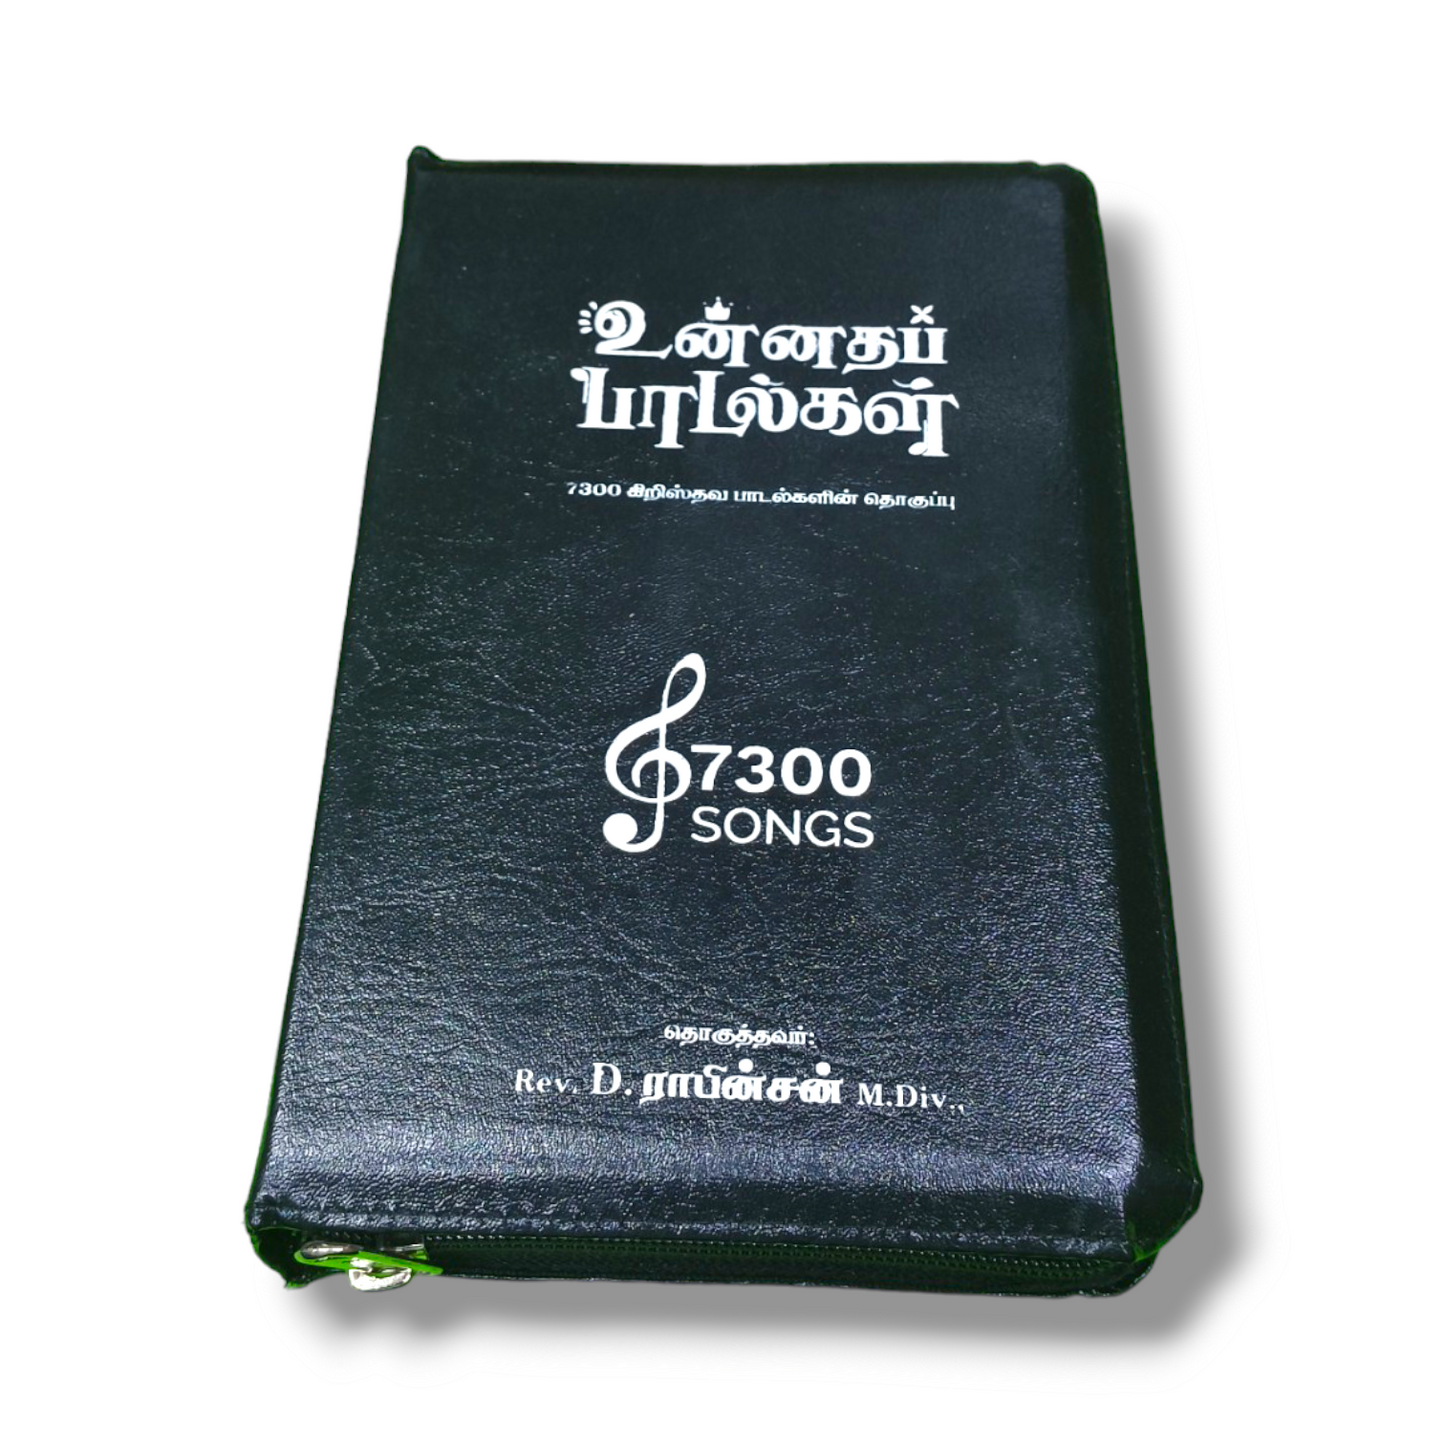 Church Gospel Song Book | With Leather Black Zip Cover Edition | More Than 7300 Pluse Songs In This Book | New Edition